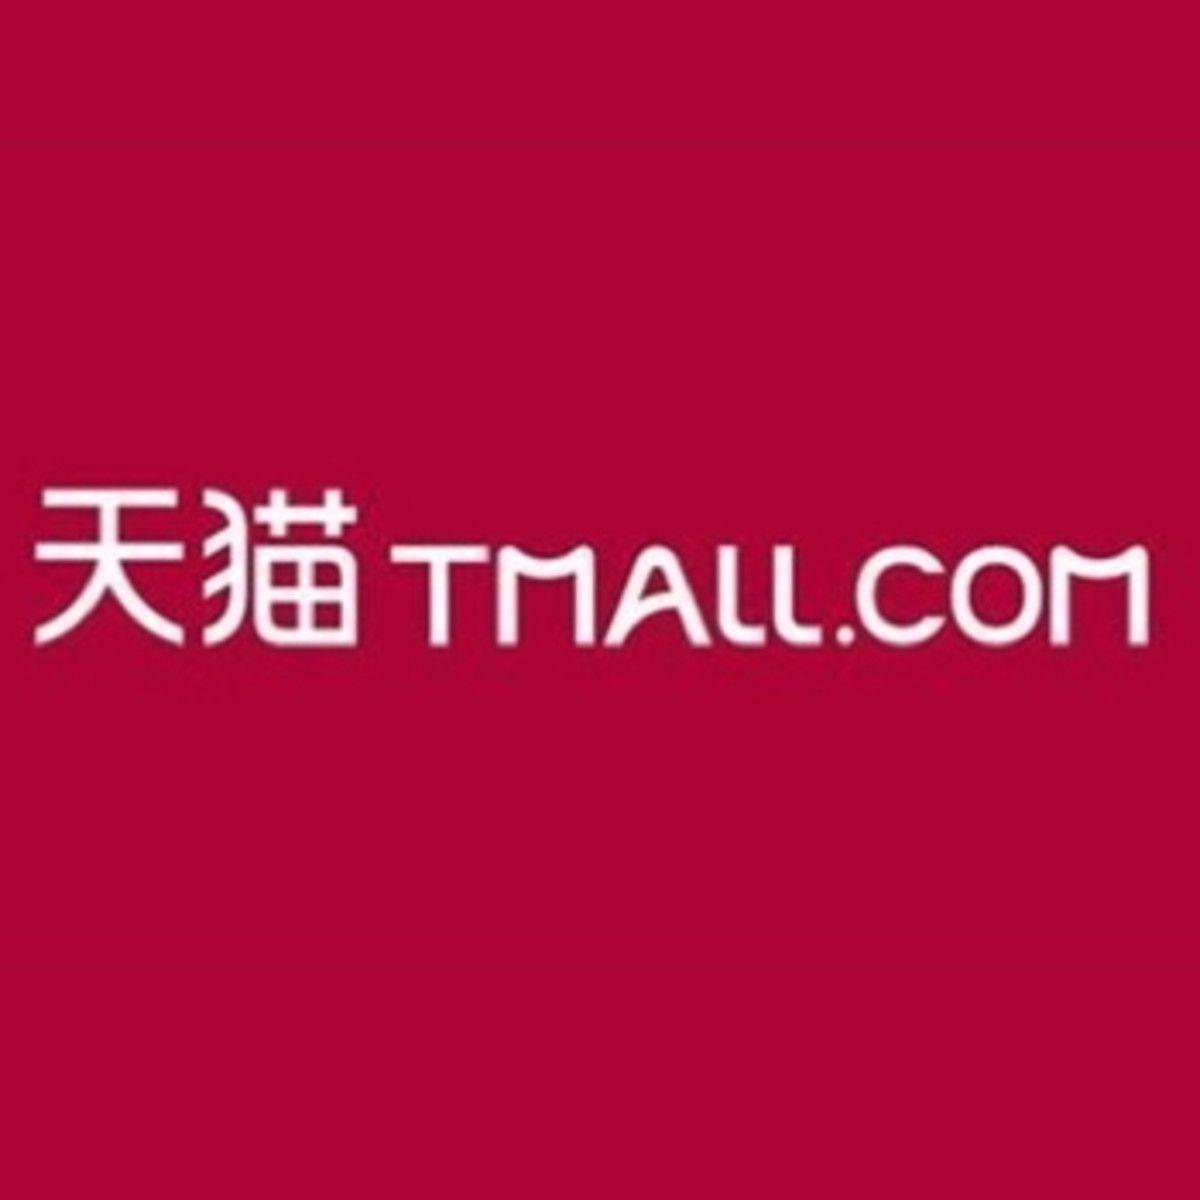 Tmall Logo - Apple bolsters its Chinese retail offering with official Tmall store